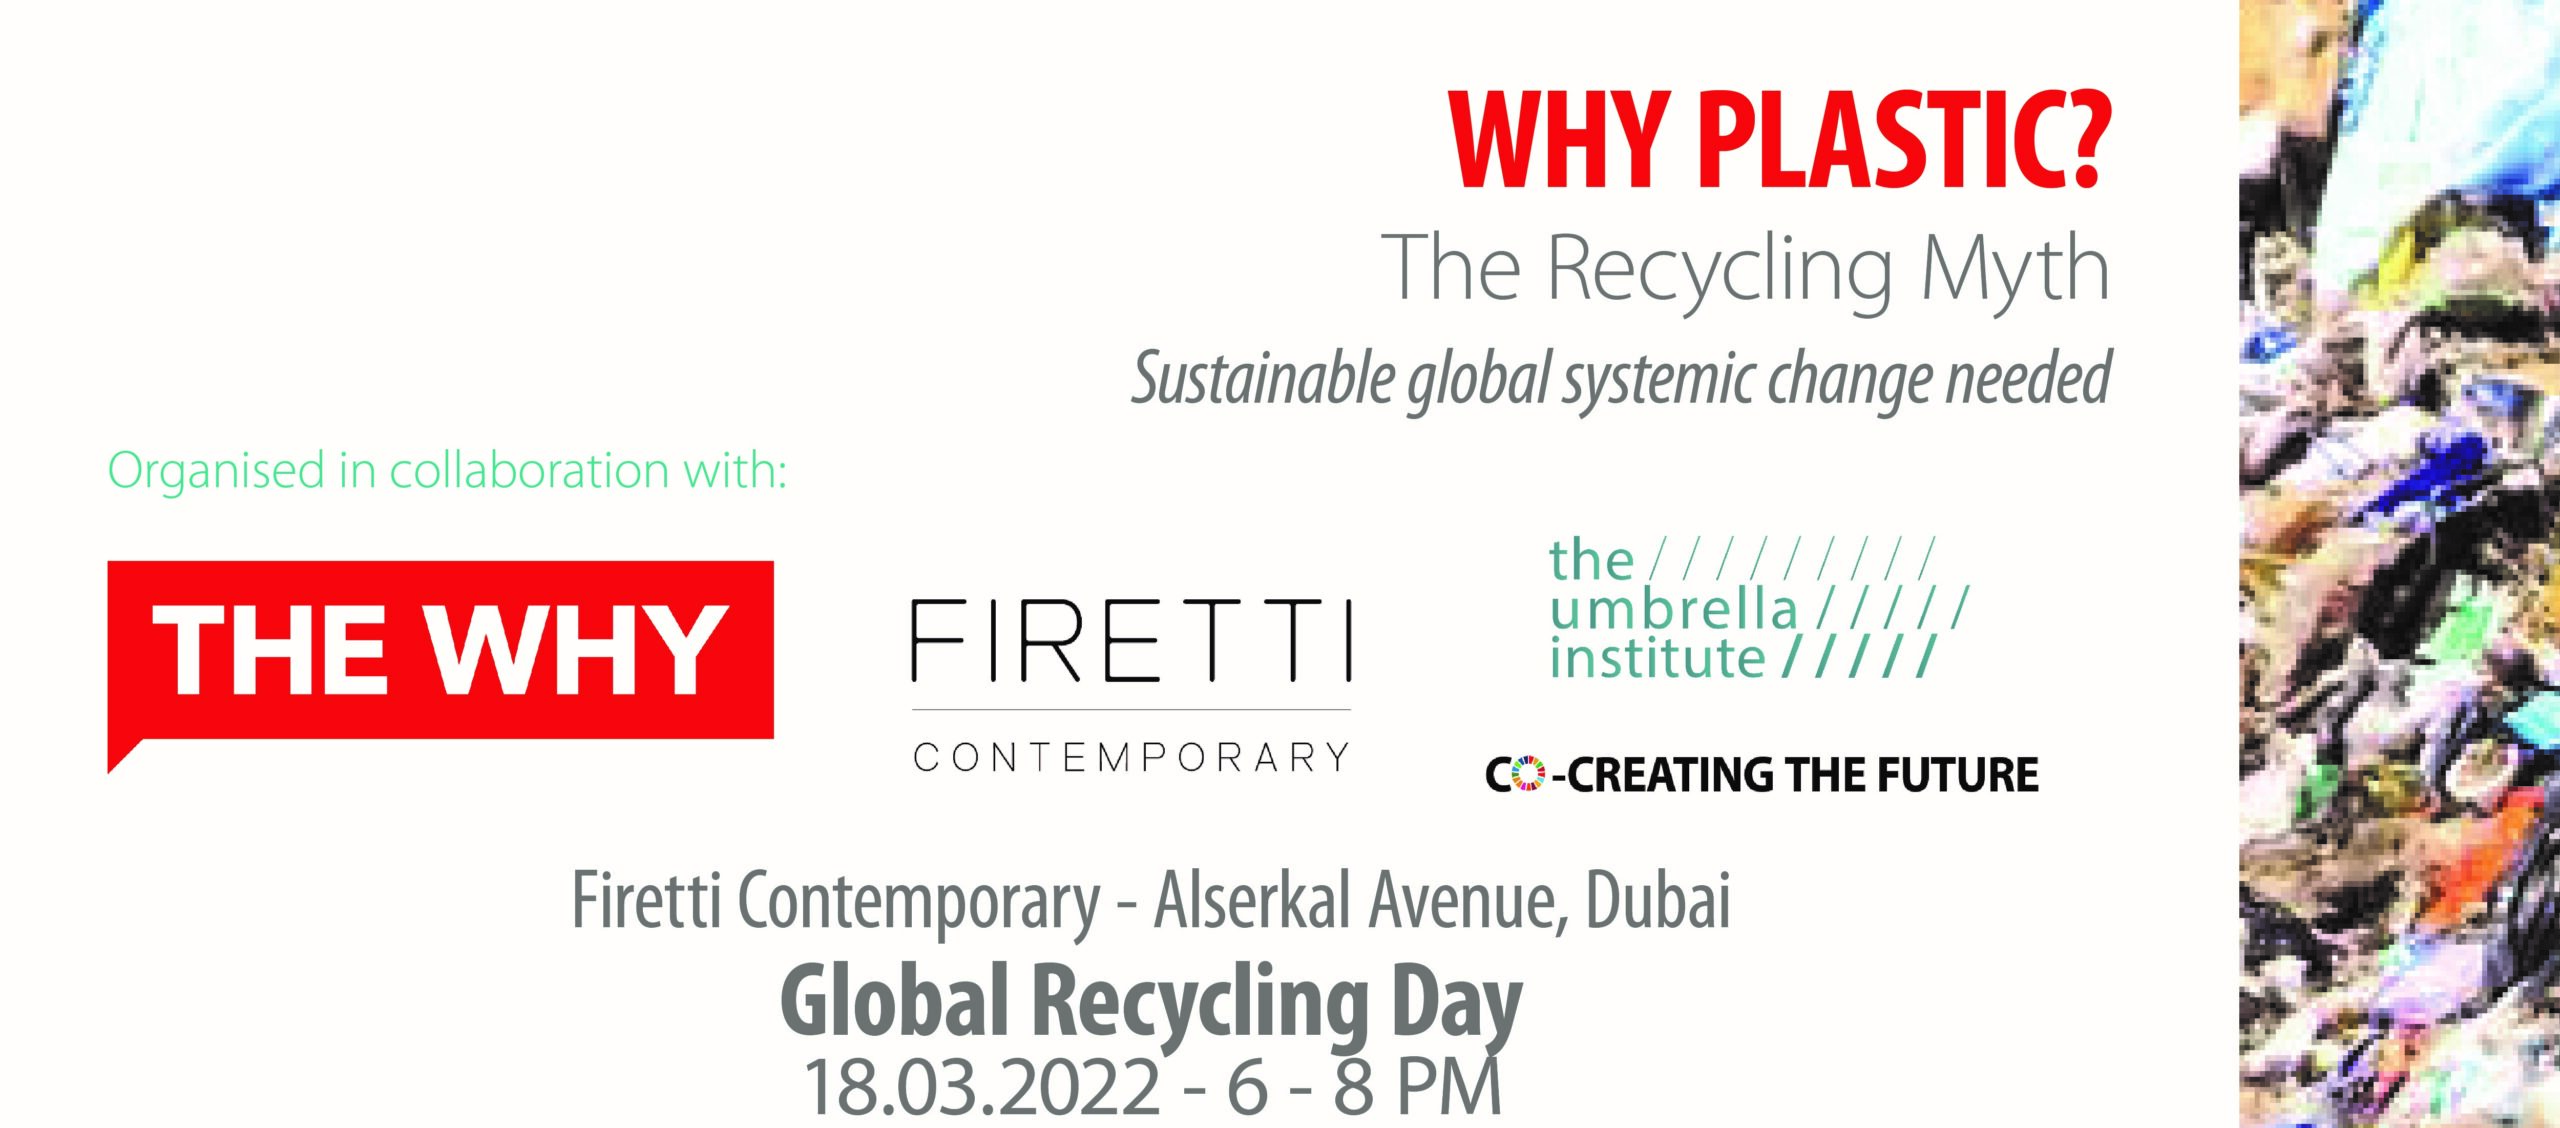 Gaps in clobal recycling system The Umbrella Institute Why Foundation WHY PLASTIC